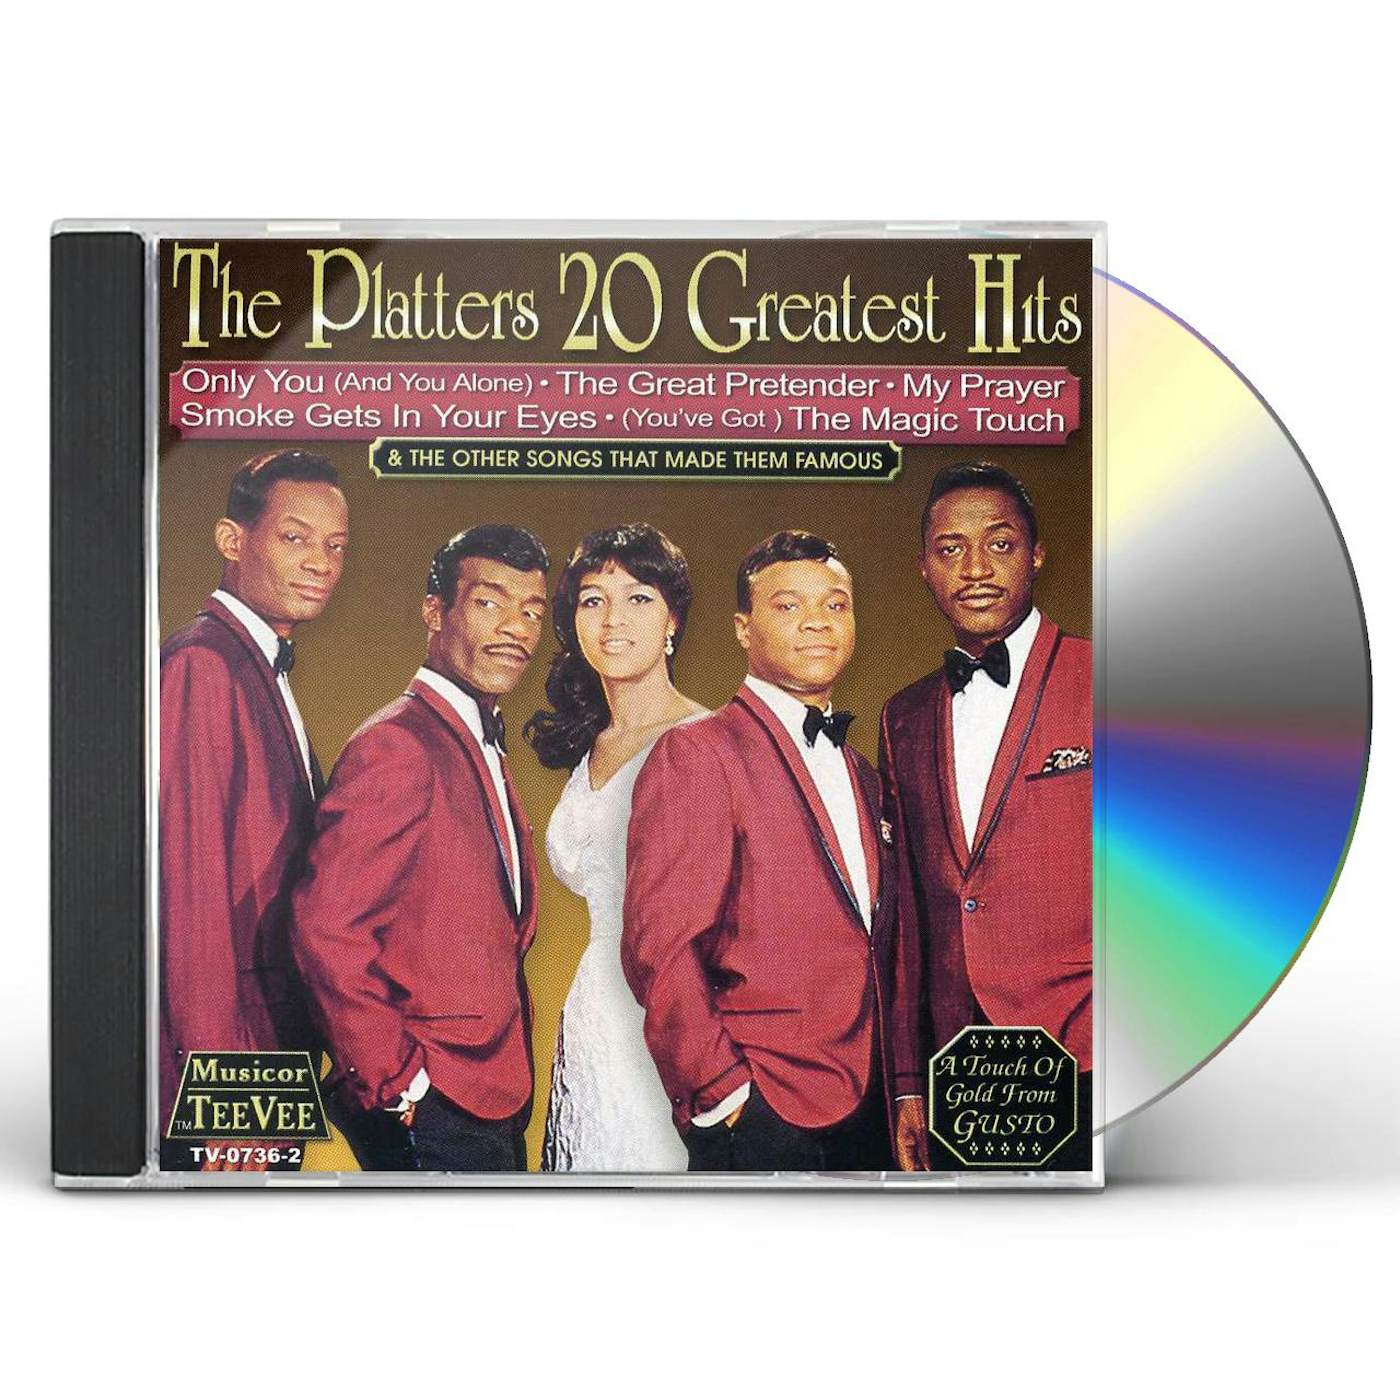 The Platters 20 GREATEST HITS CD